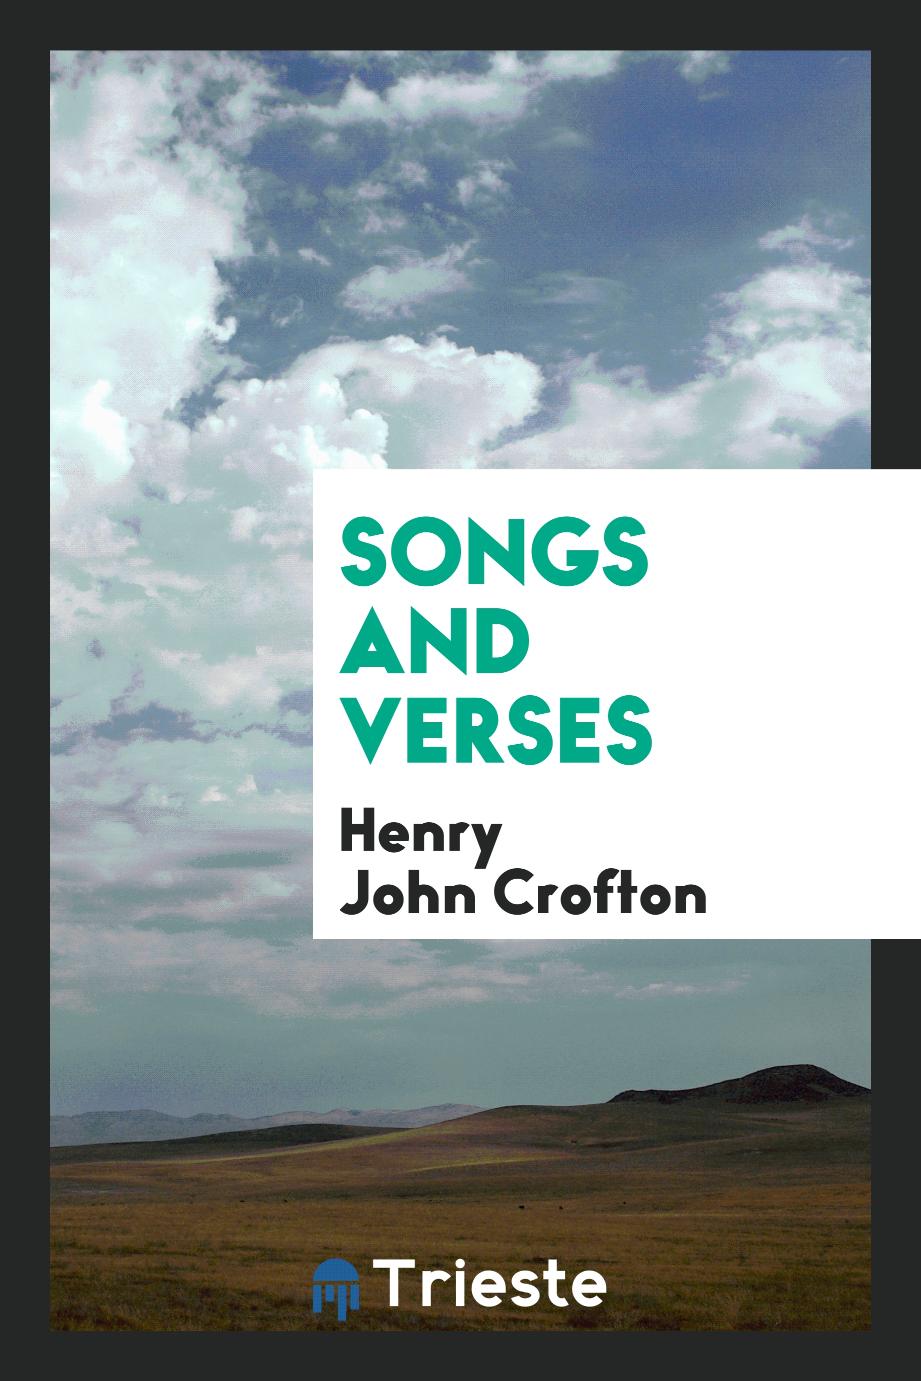 Songs and verses